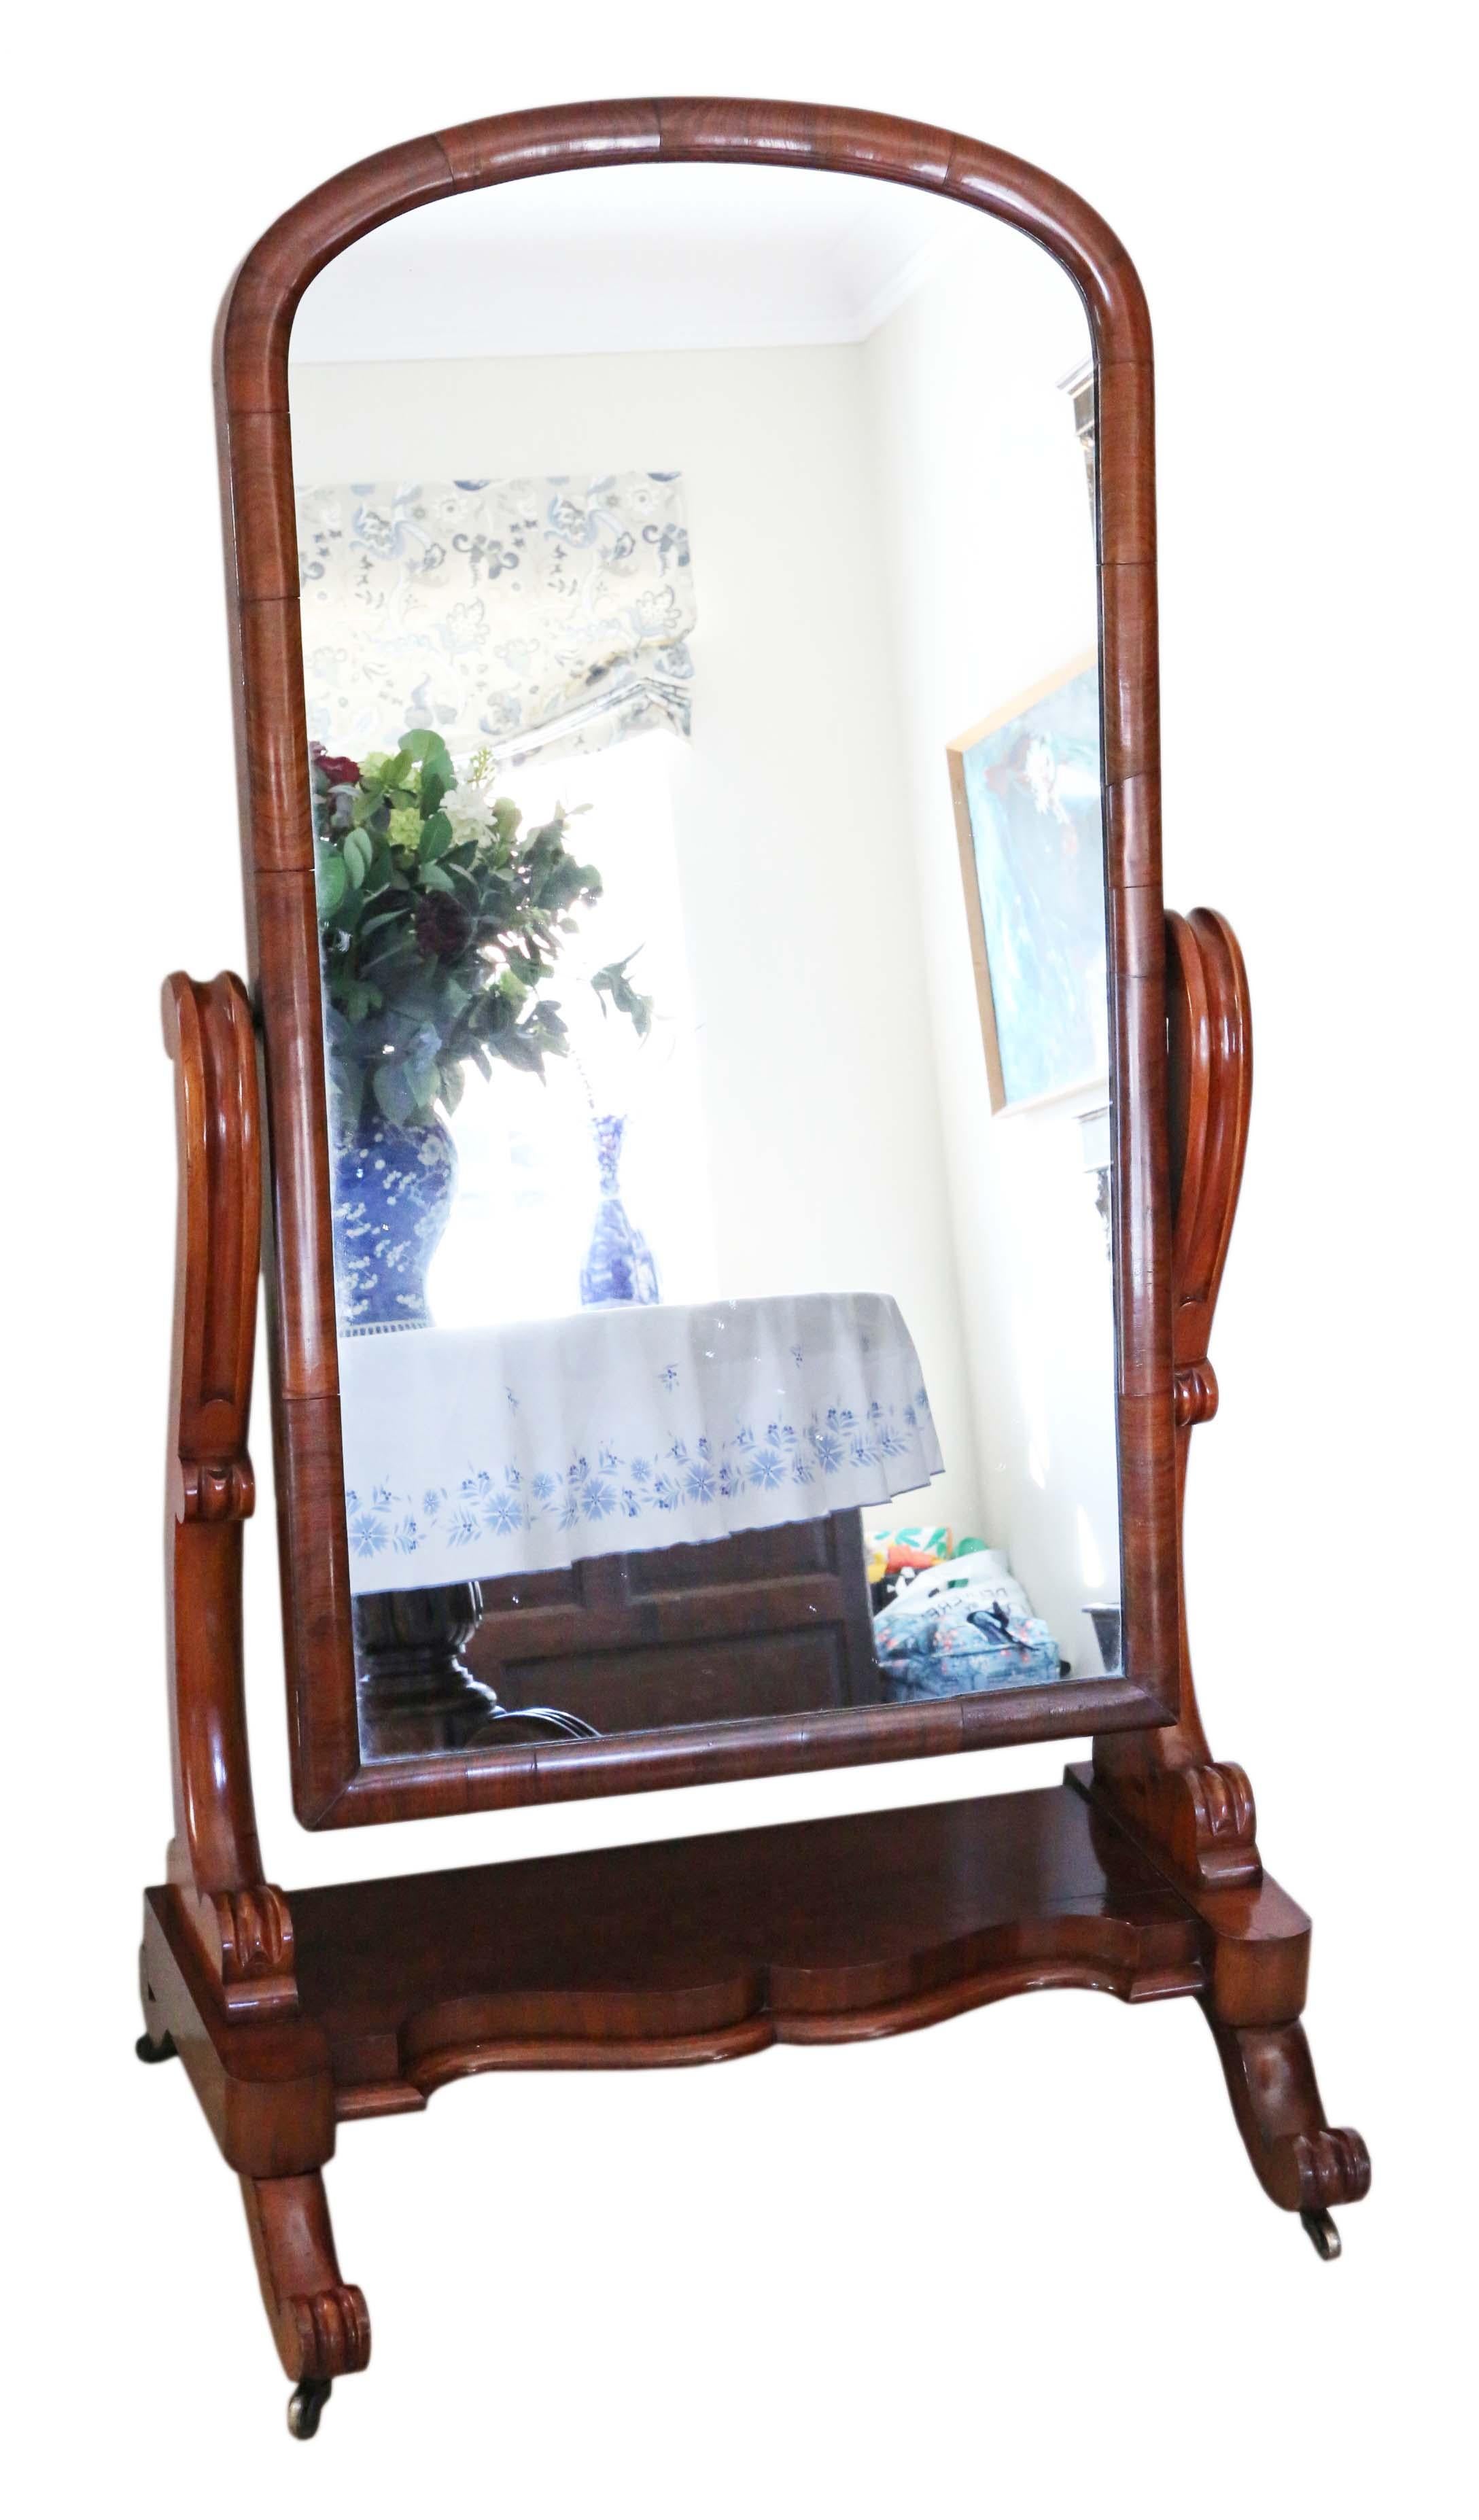 Antique Victorian 19th century quality mahogany cheval mirror C1870.

An impressive find, that would look amazing in the right location. No loose joints or woodworm.

The mirrored glass is in very good condition with only minor imperfections